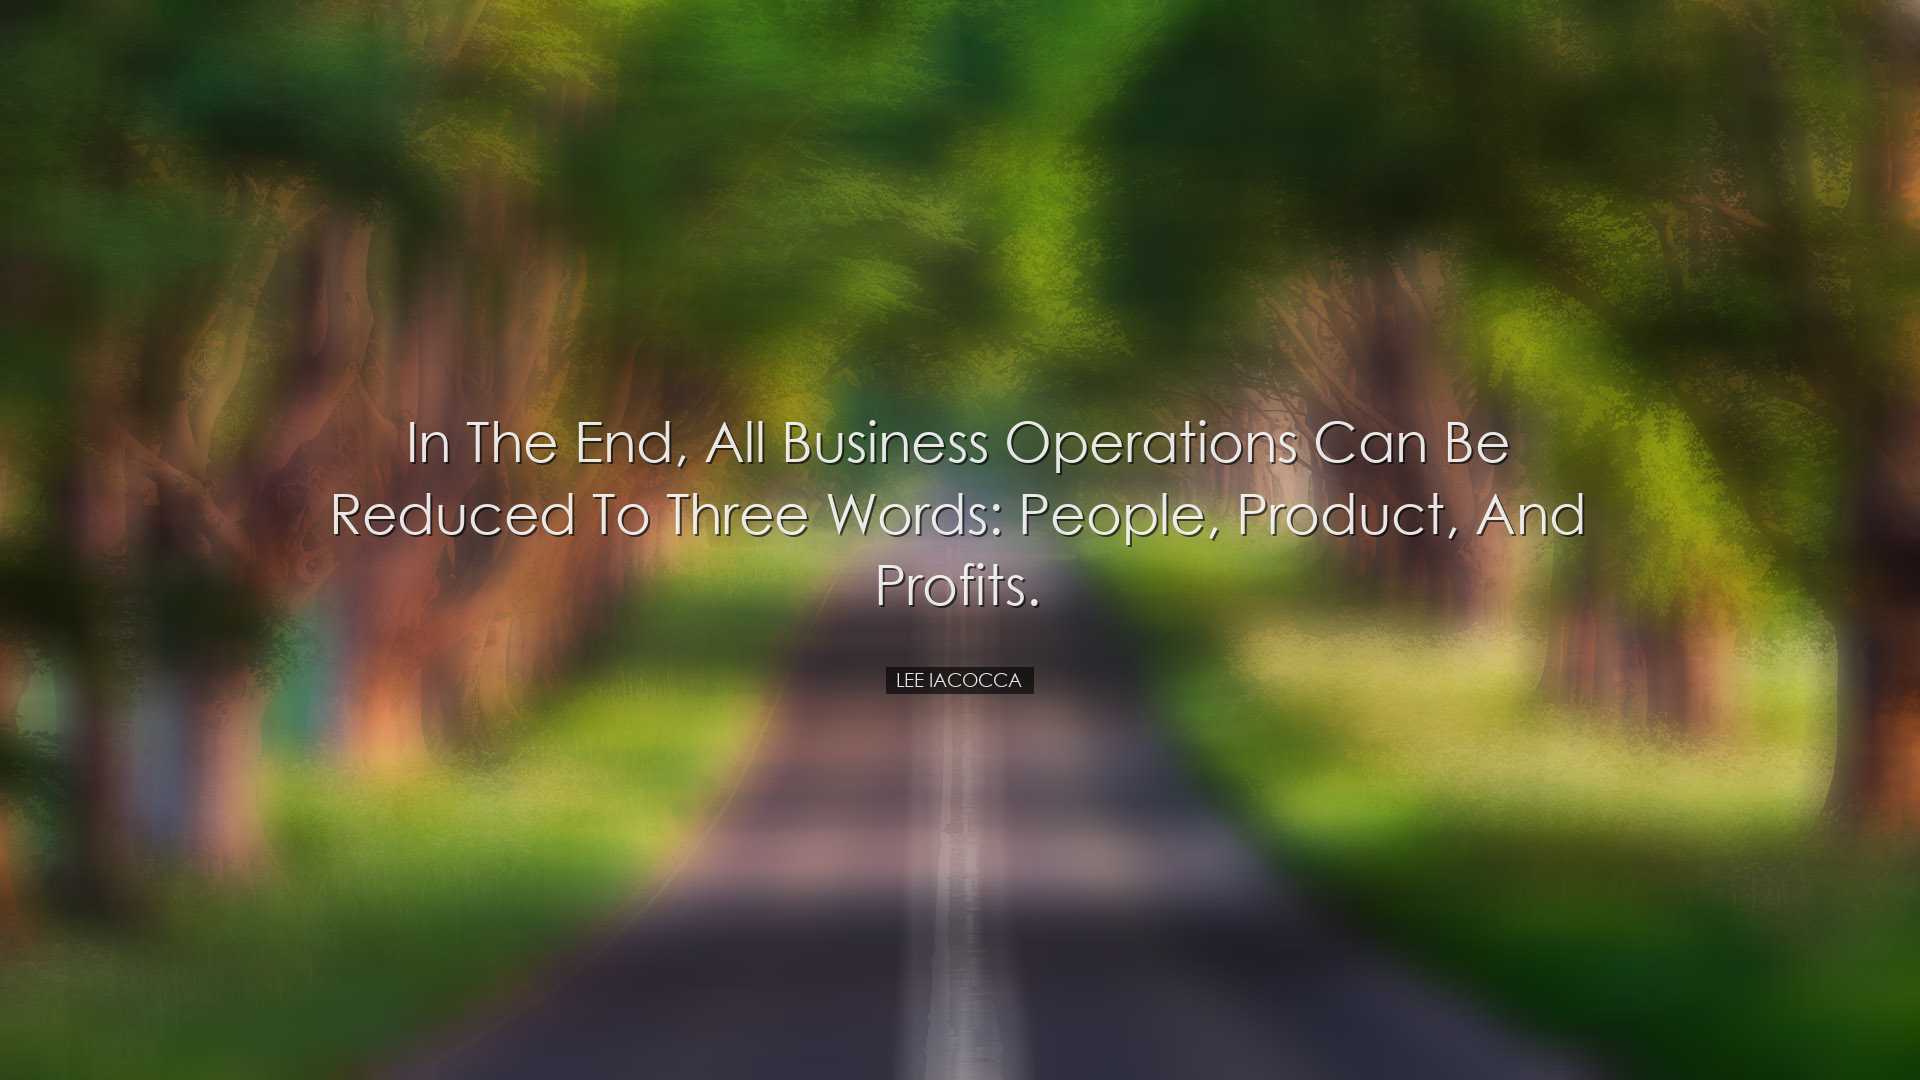 In the end, all business operations can be reduced to three words: